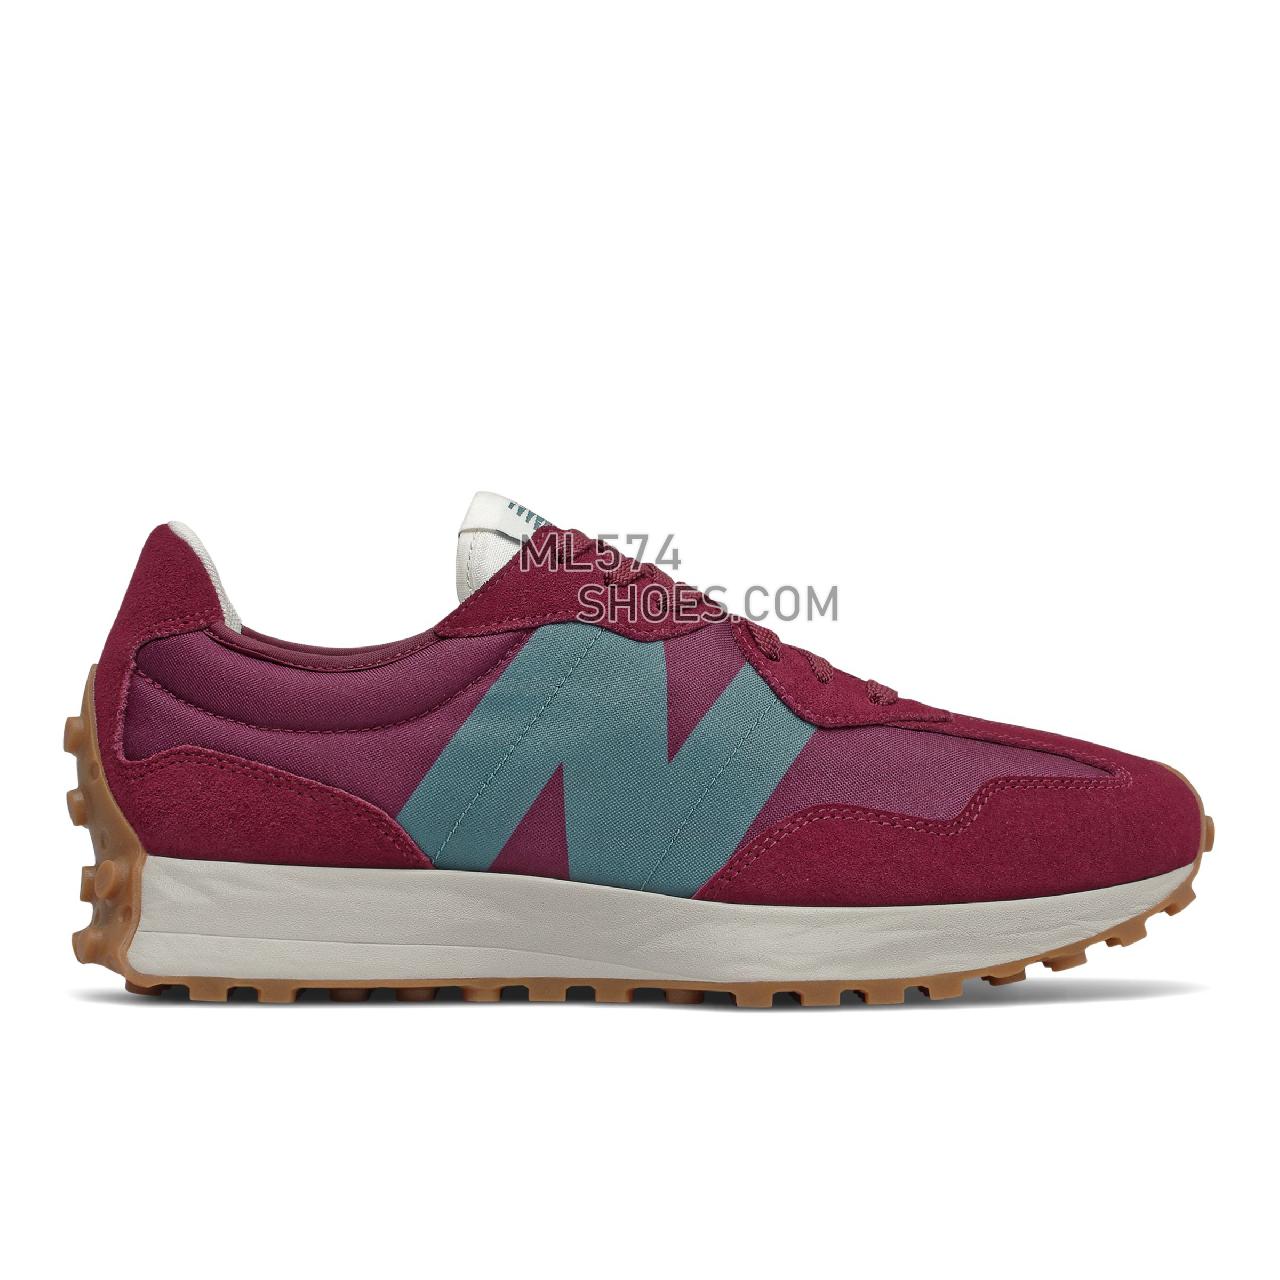 New Balance 327 - Men's Sport Style Sneakers - Garnet with Natural Indigo - MS327HE1